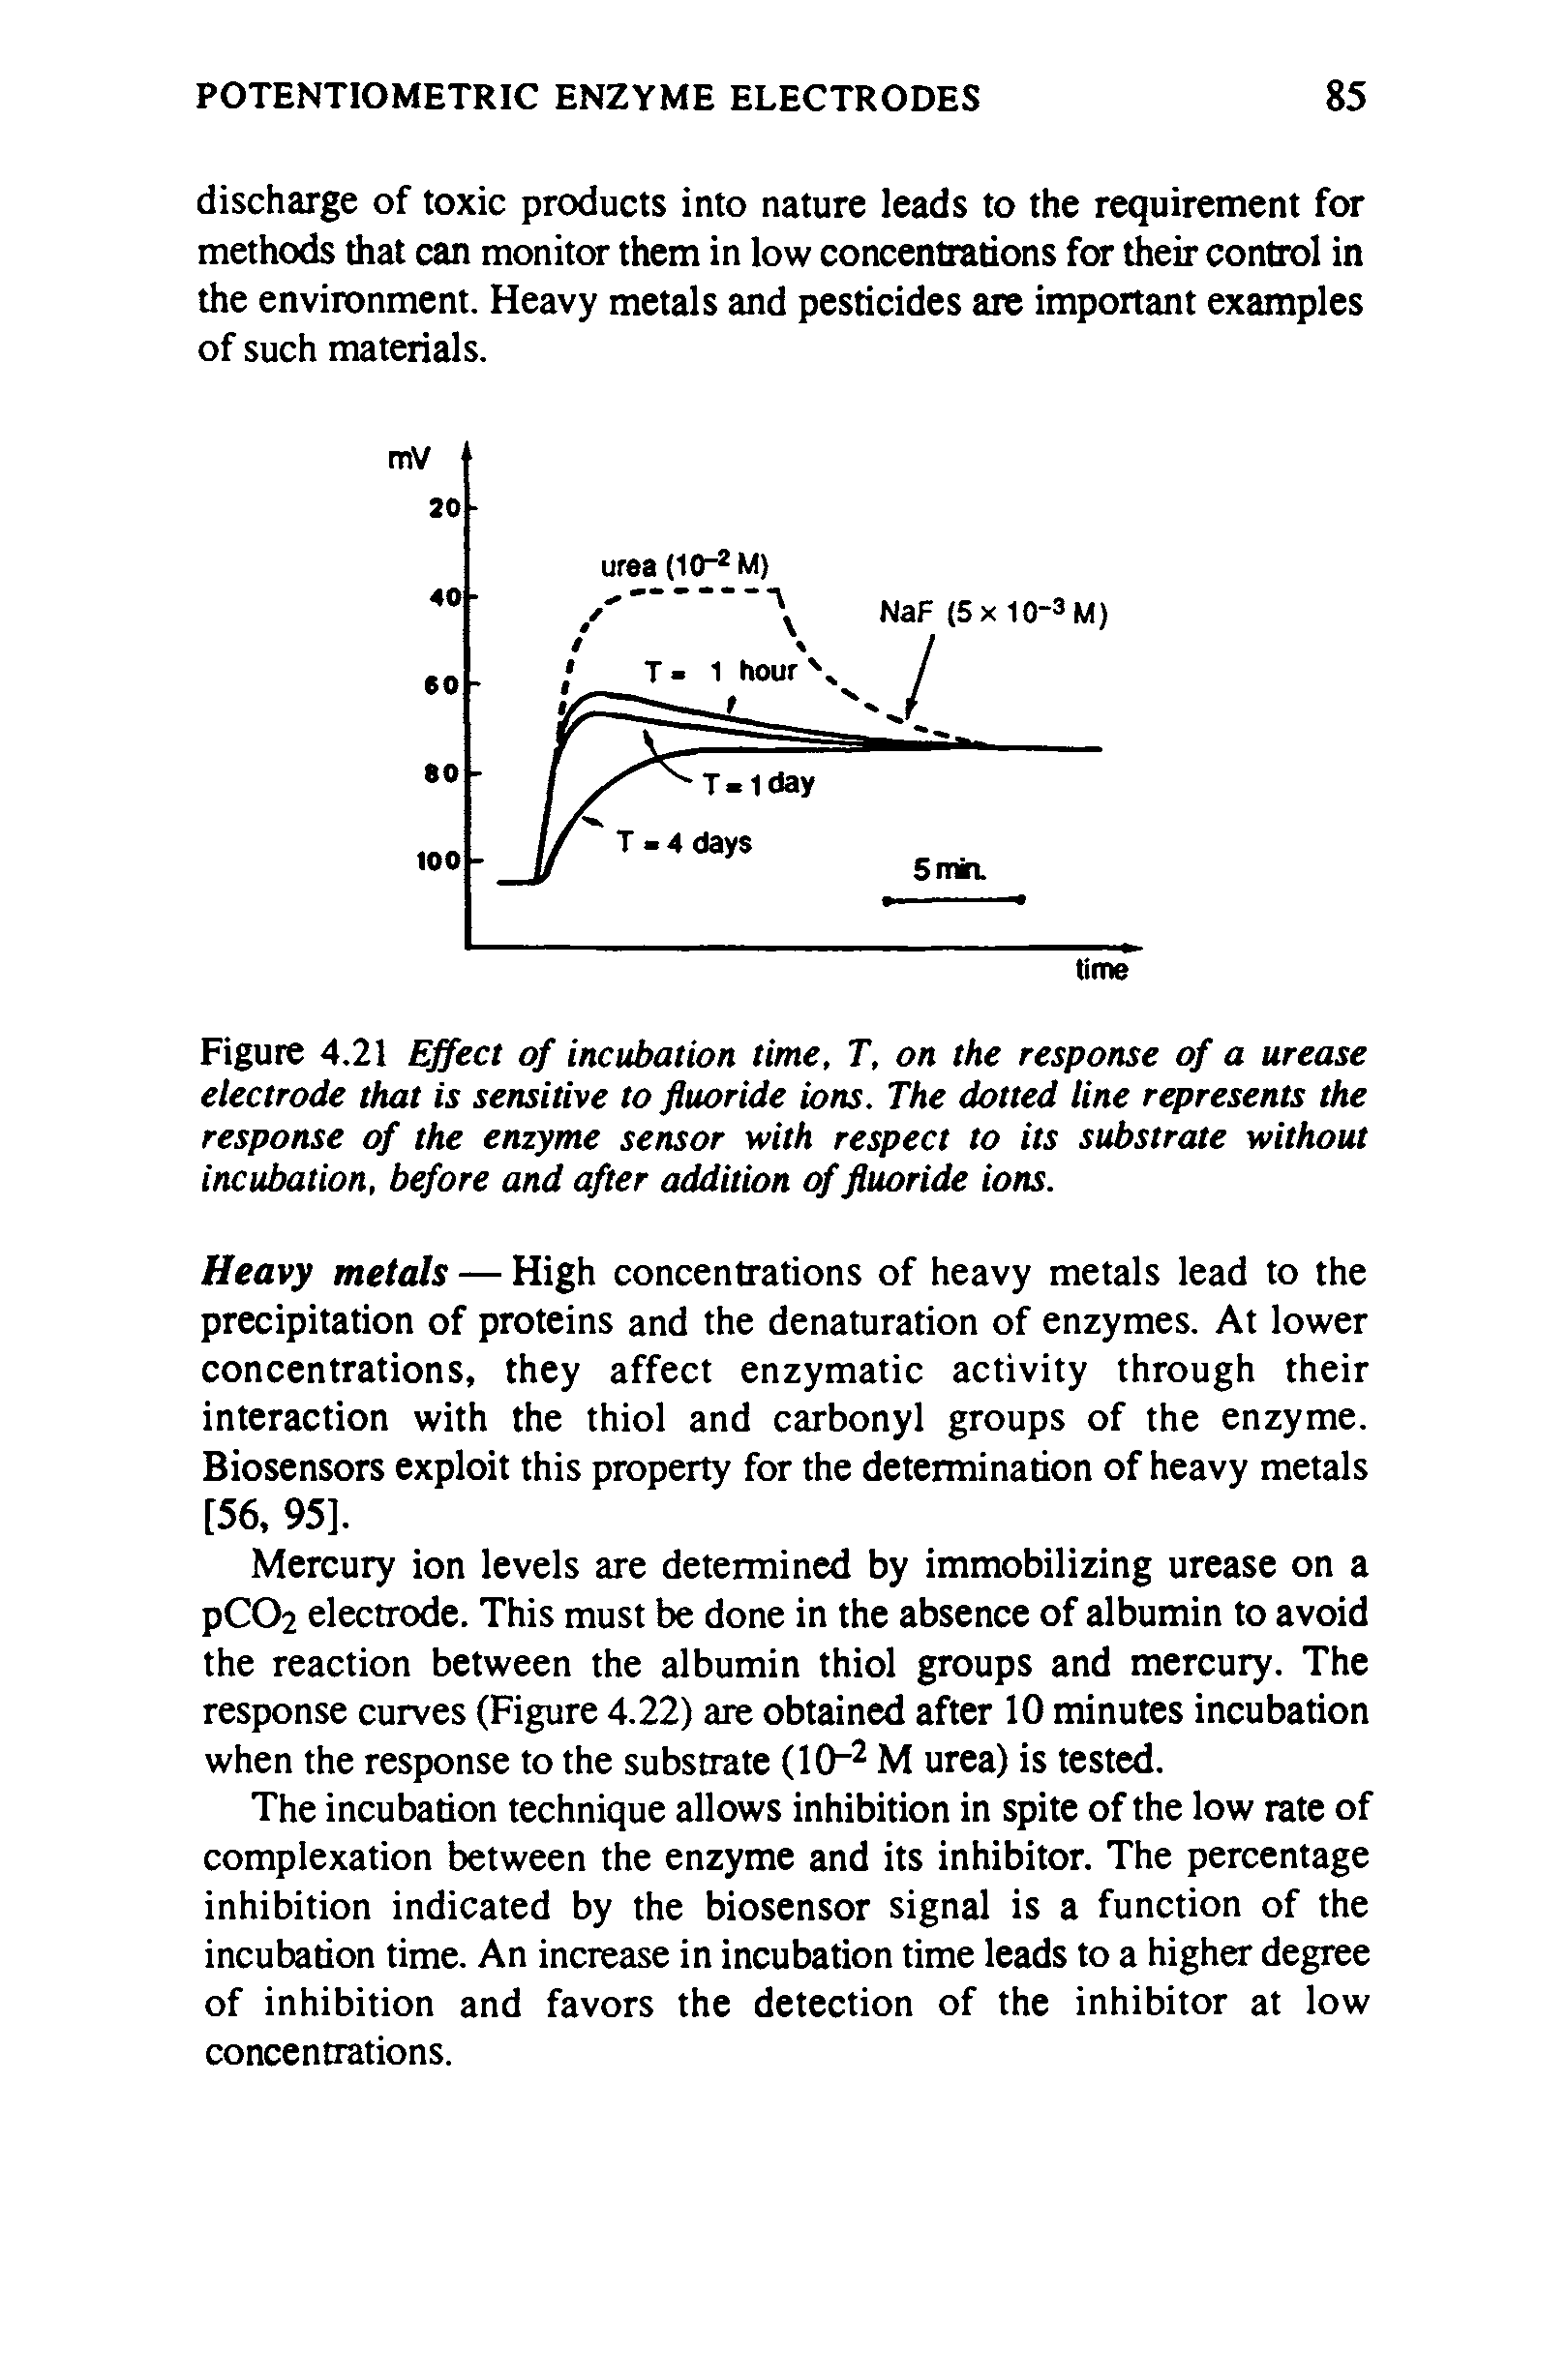 Figure 4.21 Effect of incubation time, T, on the response of a urease electrode that is sensitive to fluoride ions. The dotted line represents the response of the enzyme sensor with respect to its substrate without incubation, before and after addition of fluoride ions.